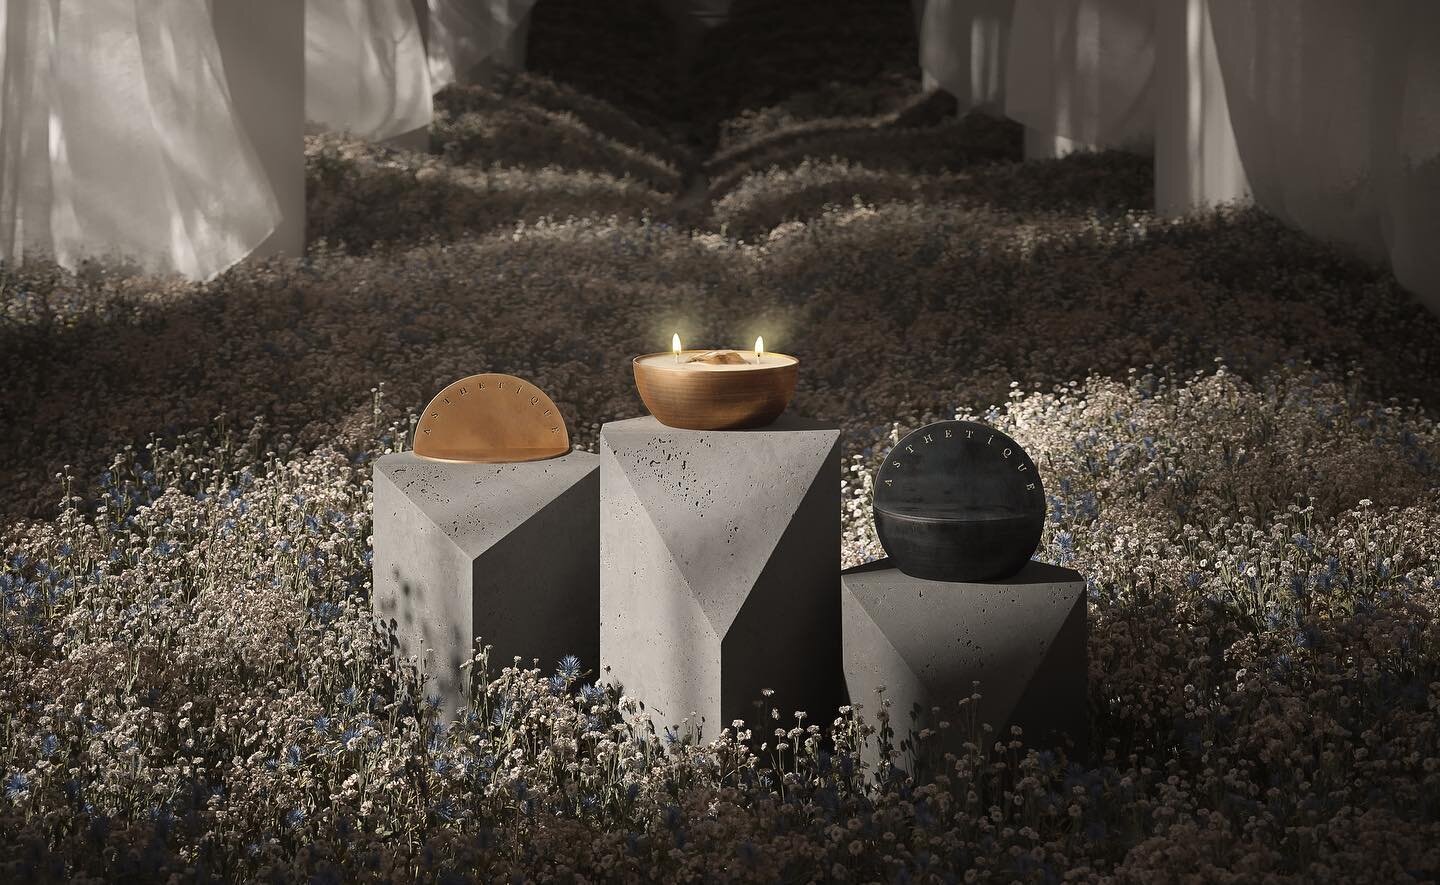 Combining our signature lens of architectural tactility with sensory dimensionality we created the La Sph&eacute;re collection. From Asthetique to your home.

#asthetique #asthetiqueatelier #solointhesky #bohemiaafterdark #artcandle #homedecor #candl